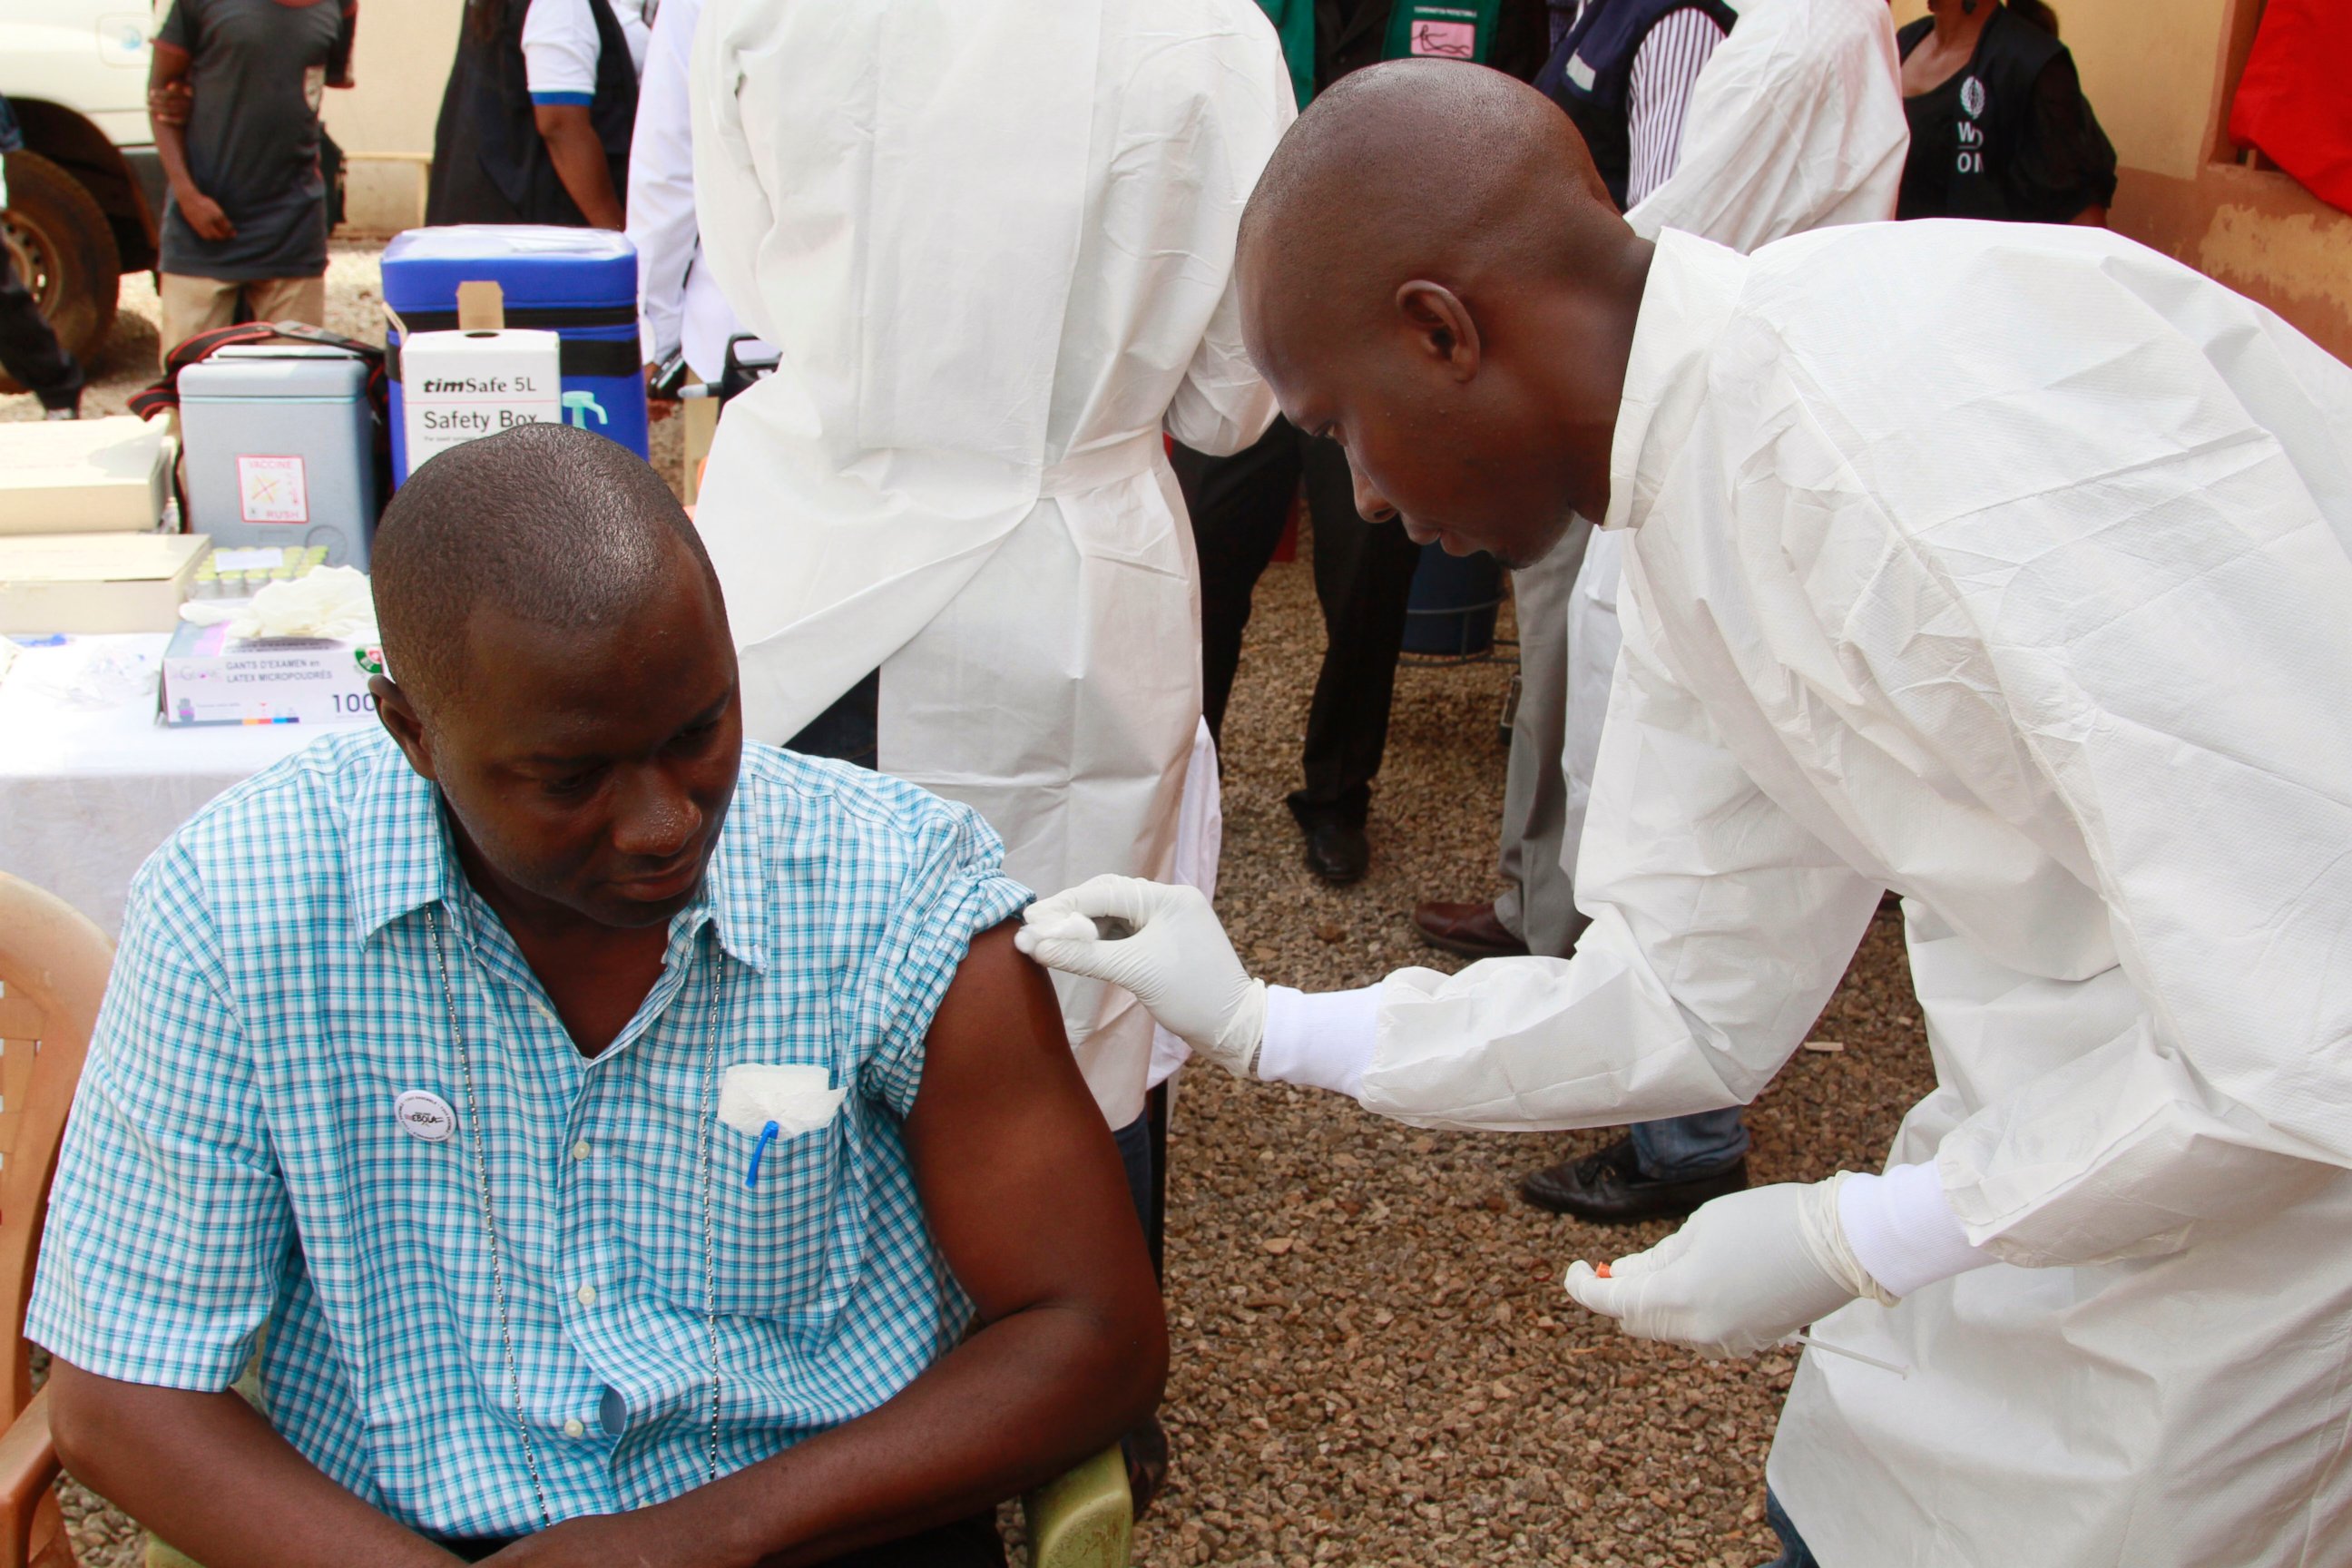 PHOTO:A health worker, right, cleans a man's arm before injecting him with a Ebola vaccine  in Conakry, Guinea in this March 7, 2015 file photo.